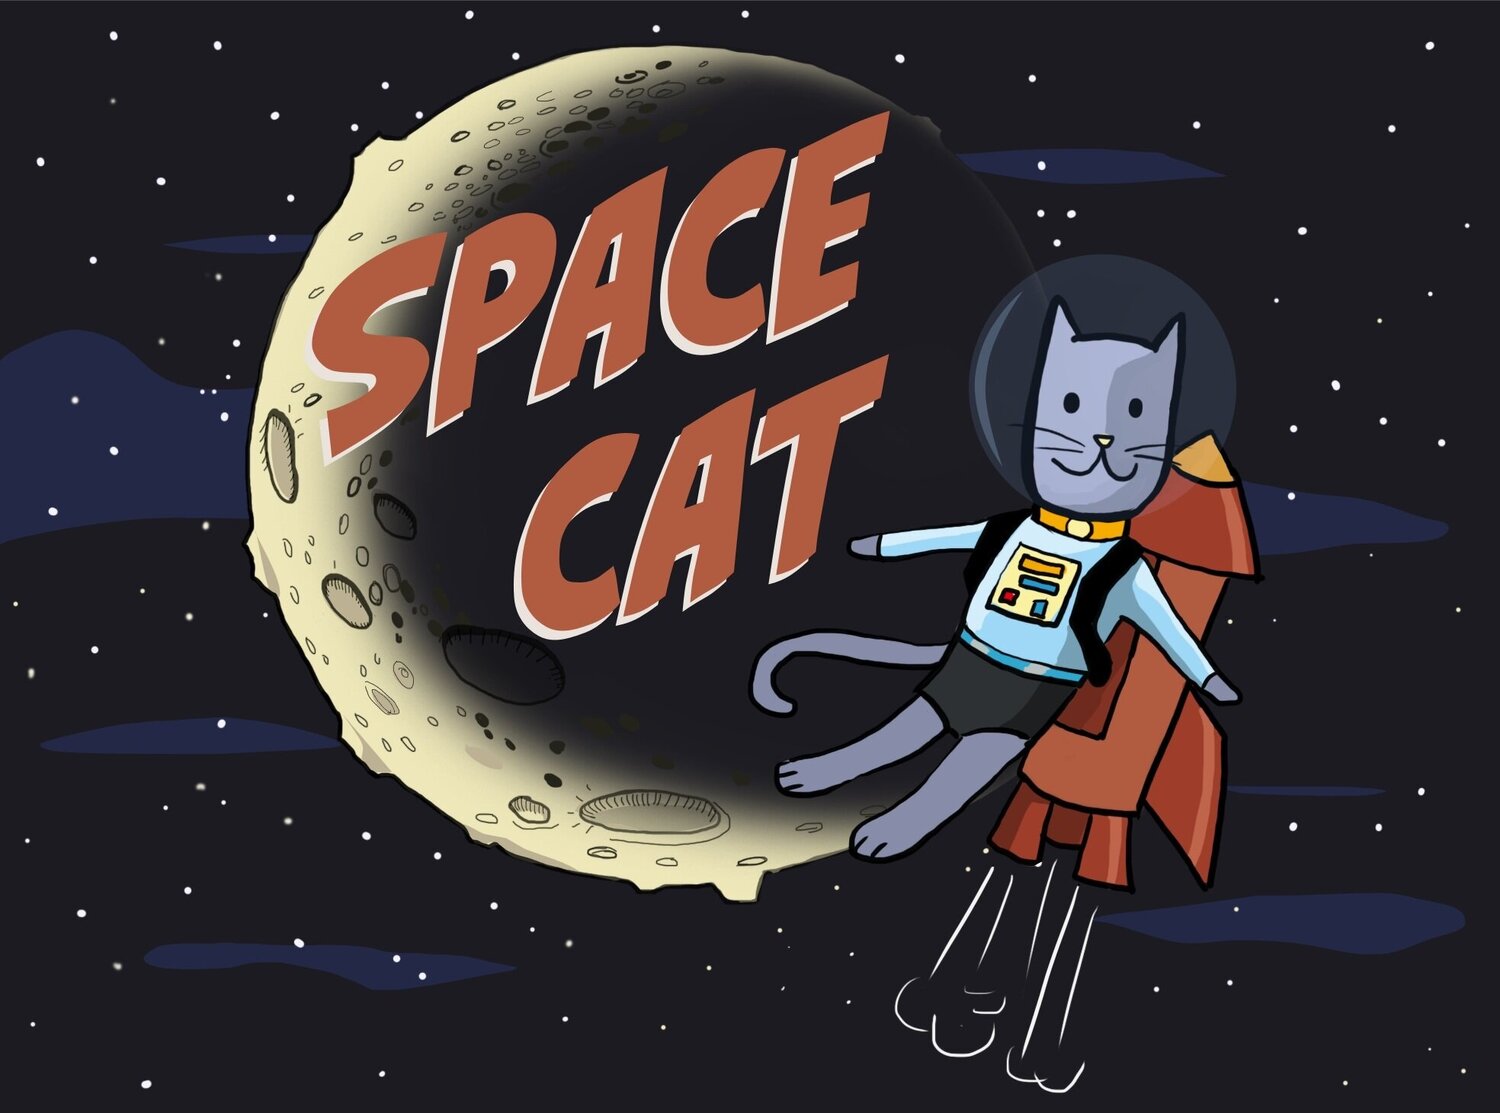 Space Cat Productions